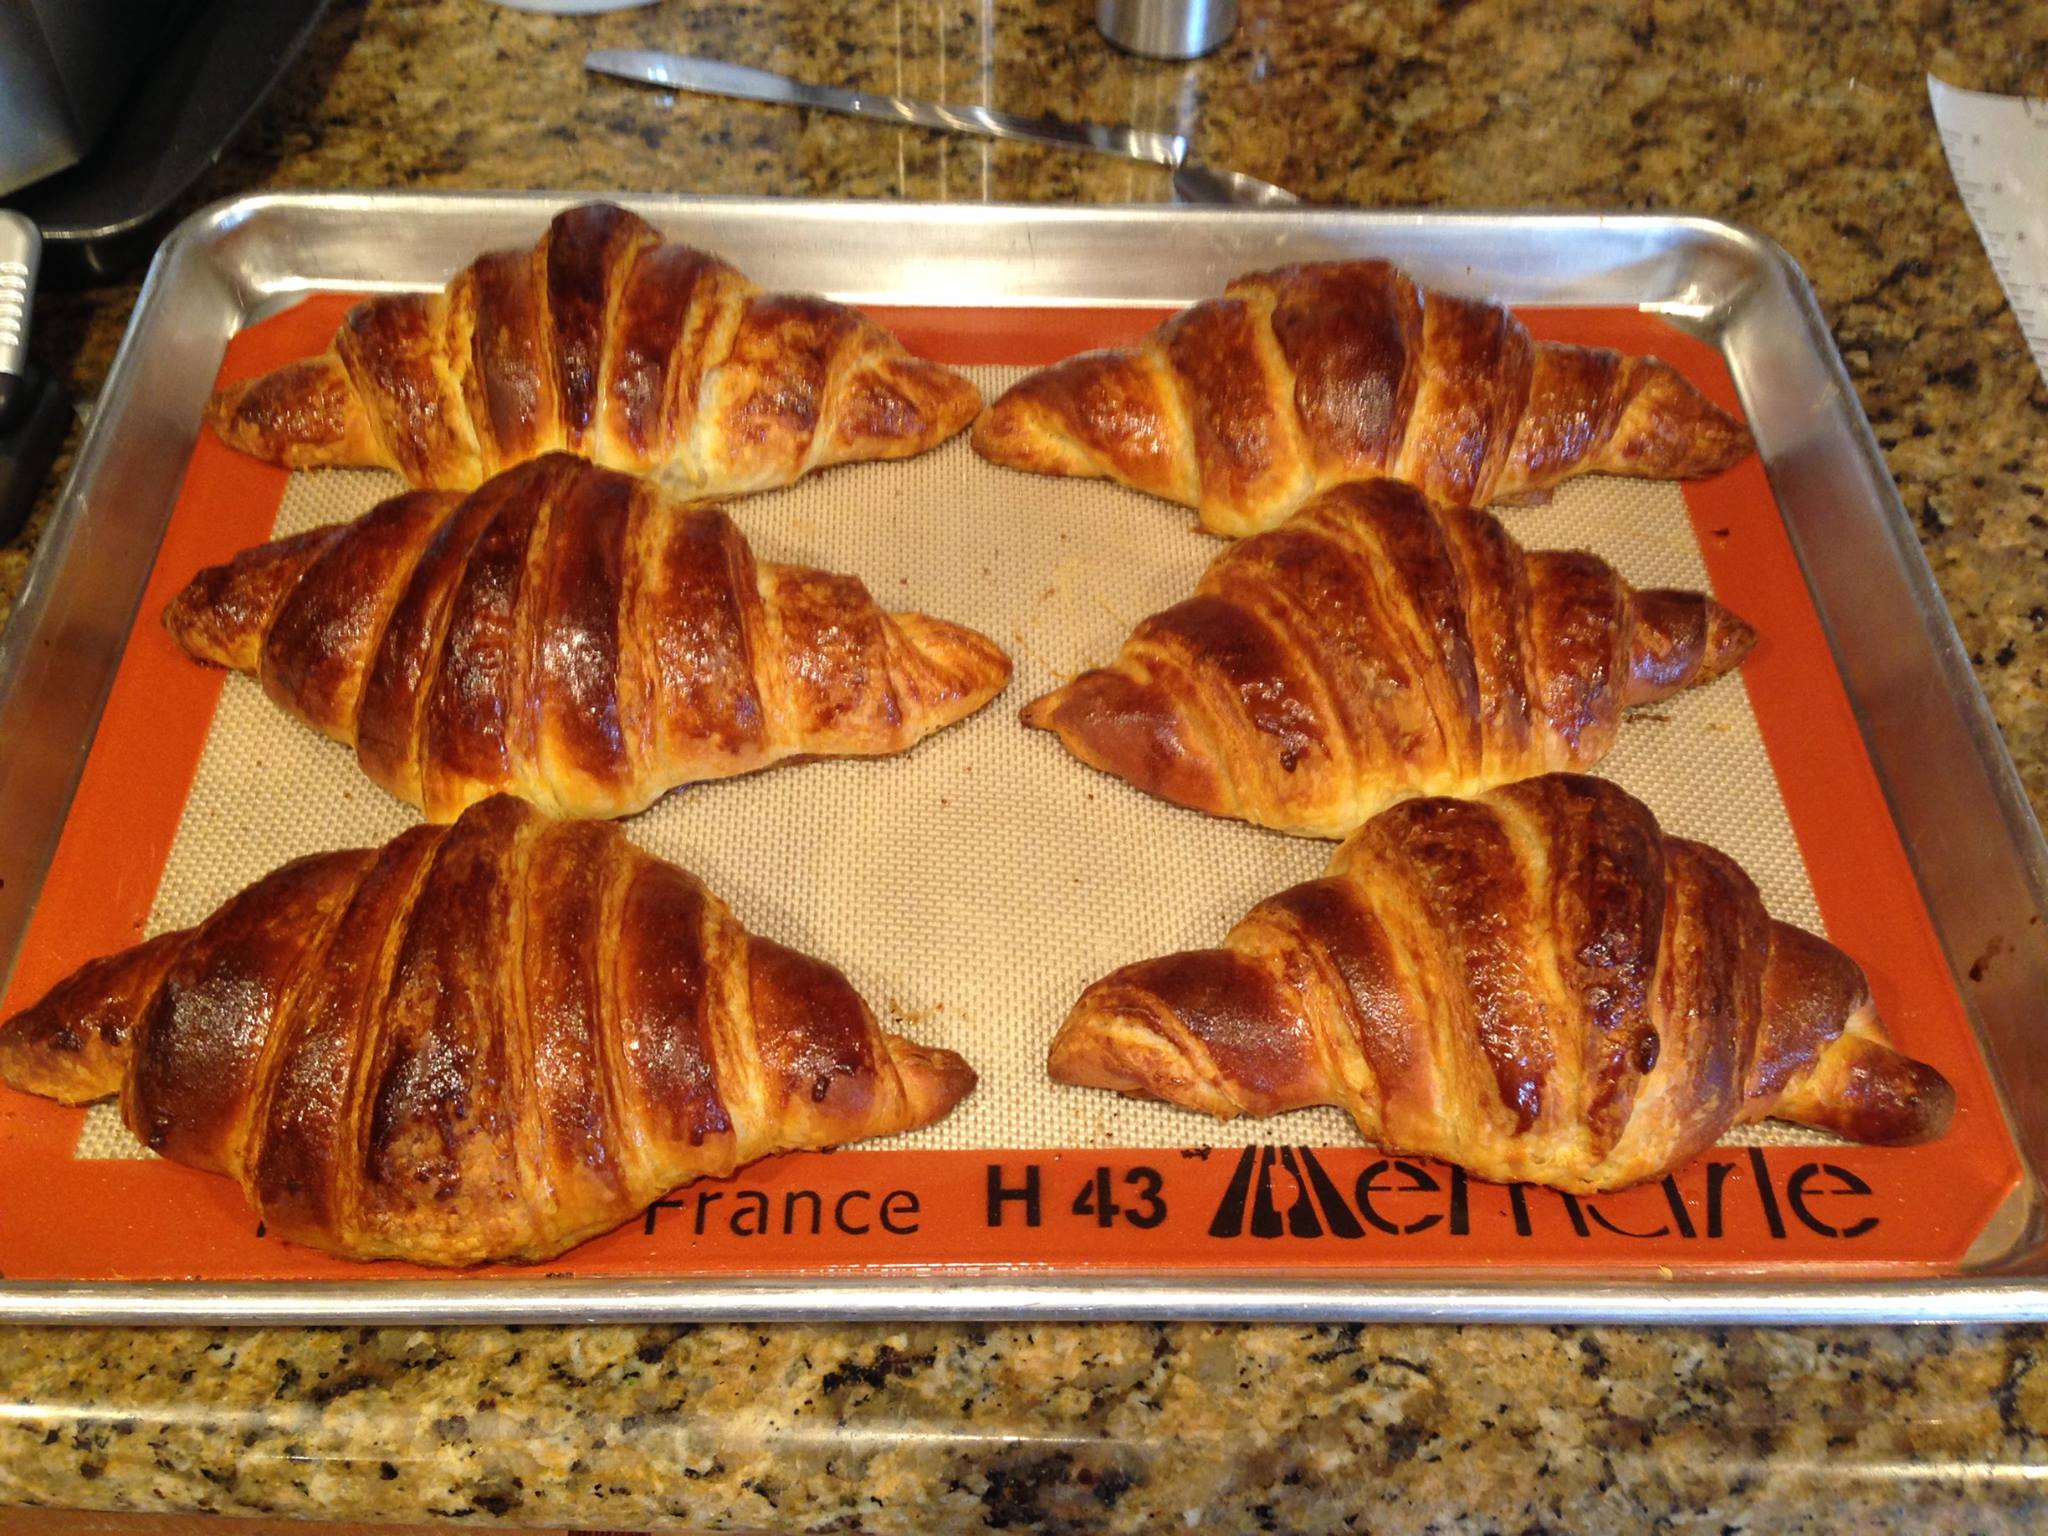 The croissants came out awesomely well